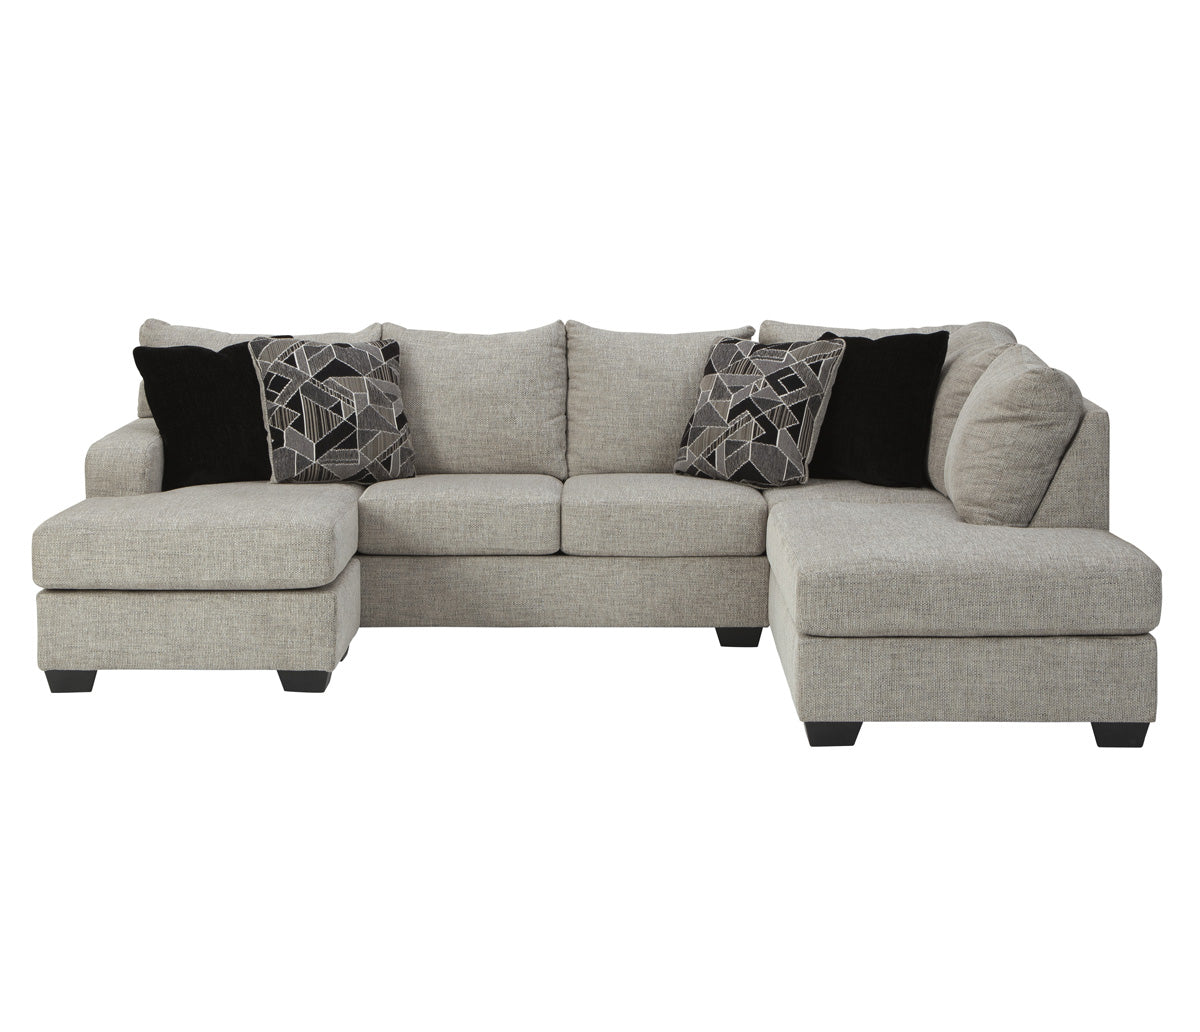 Storm 2 Piece Sectional - Grey Fabric